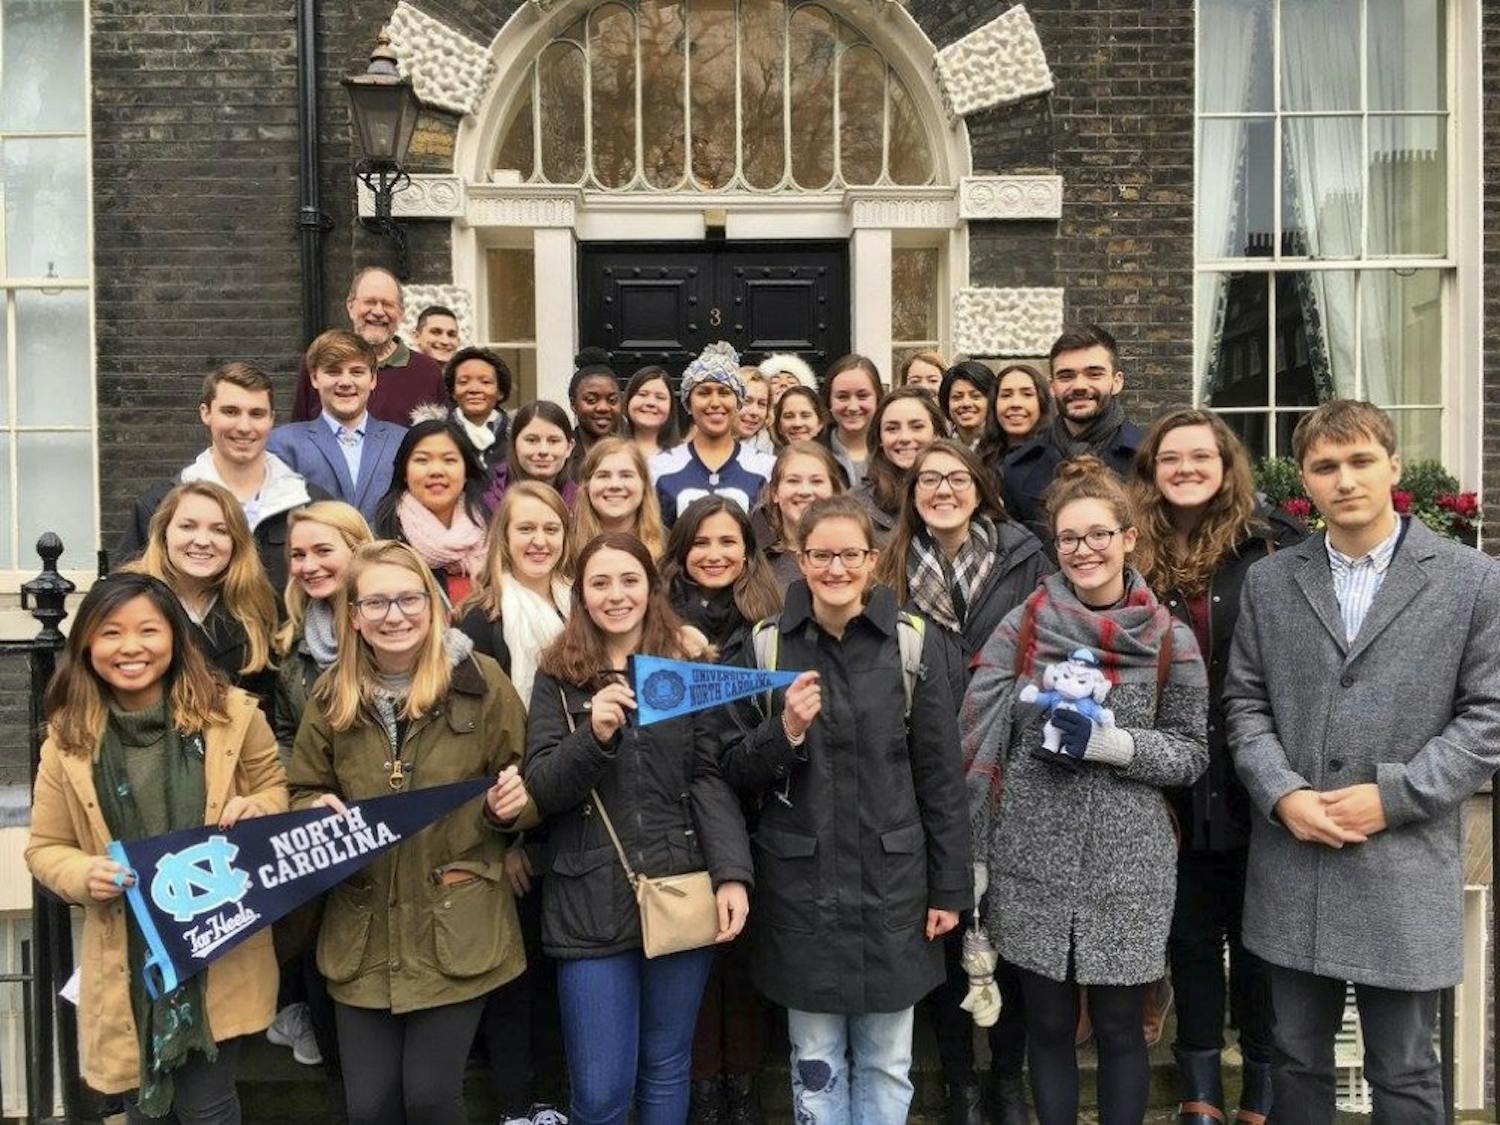 UNC students currently studying abroad in London pose for a group photo. Photo Courtesy of UNC Faculty.